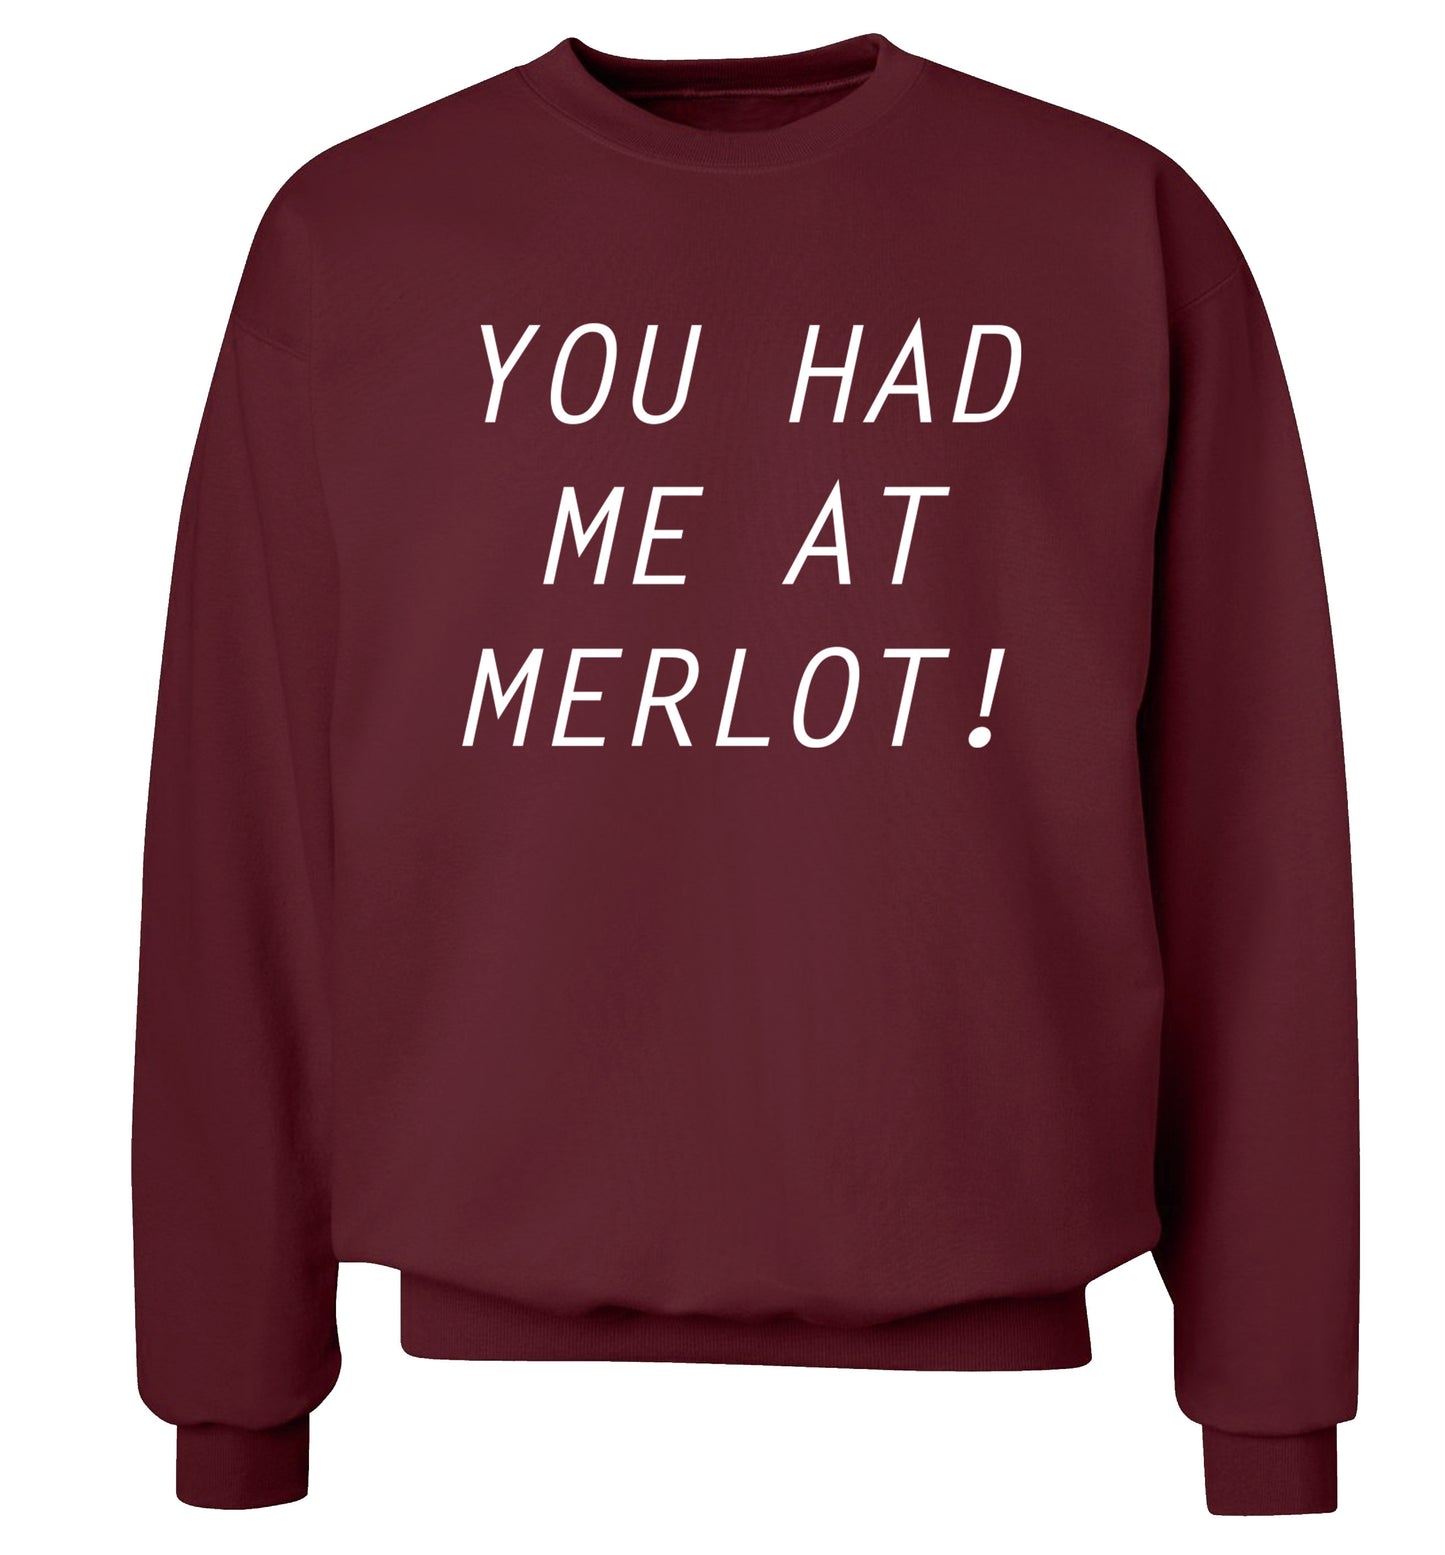 You had me at merlot Adult's unisex maroon Sweater 2XL